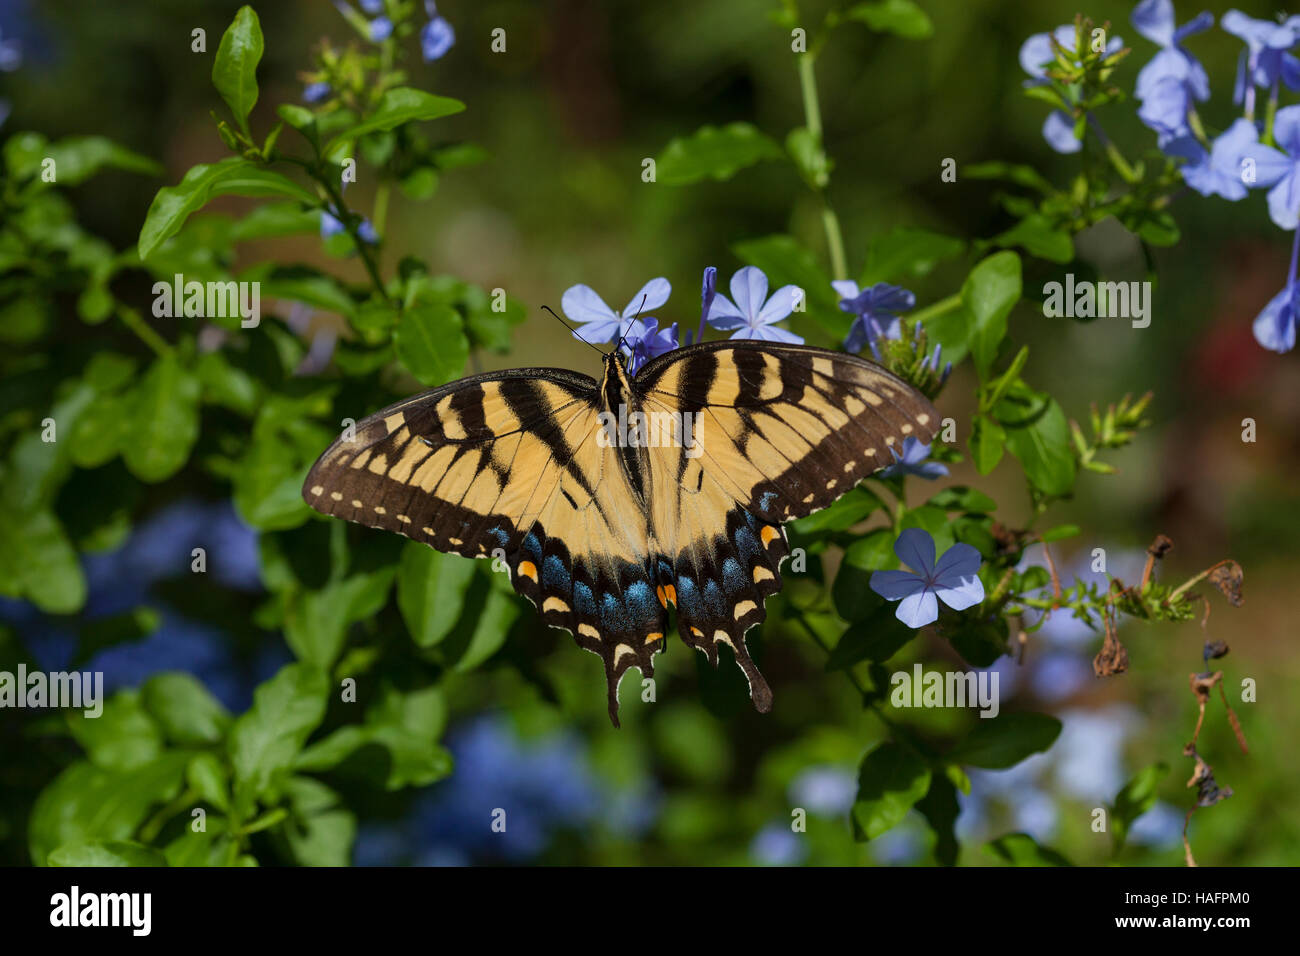 A female eastern swallowtail butterfly ( Papilio glaucus) on plumbago plant, Ponte Vedra beach, Florida, USA Stock Photo